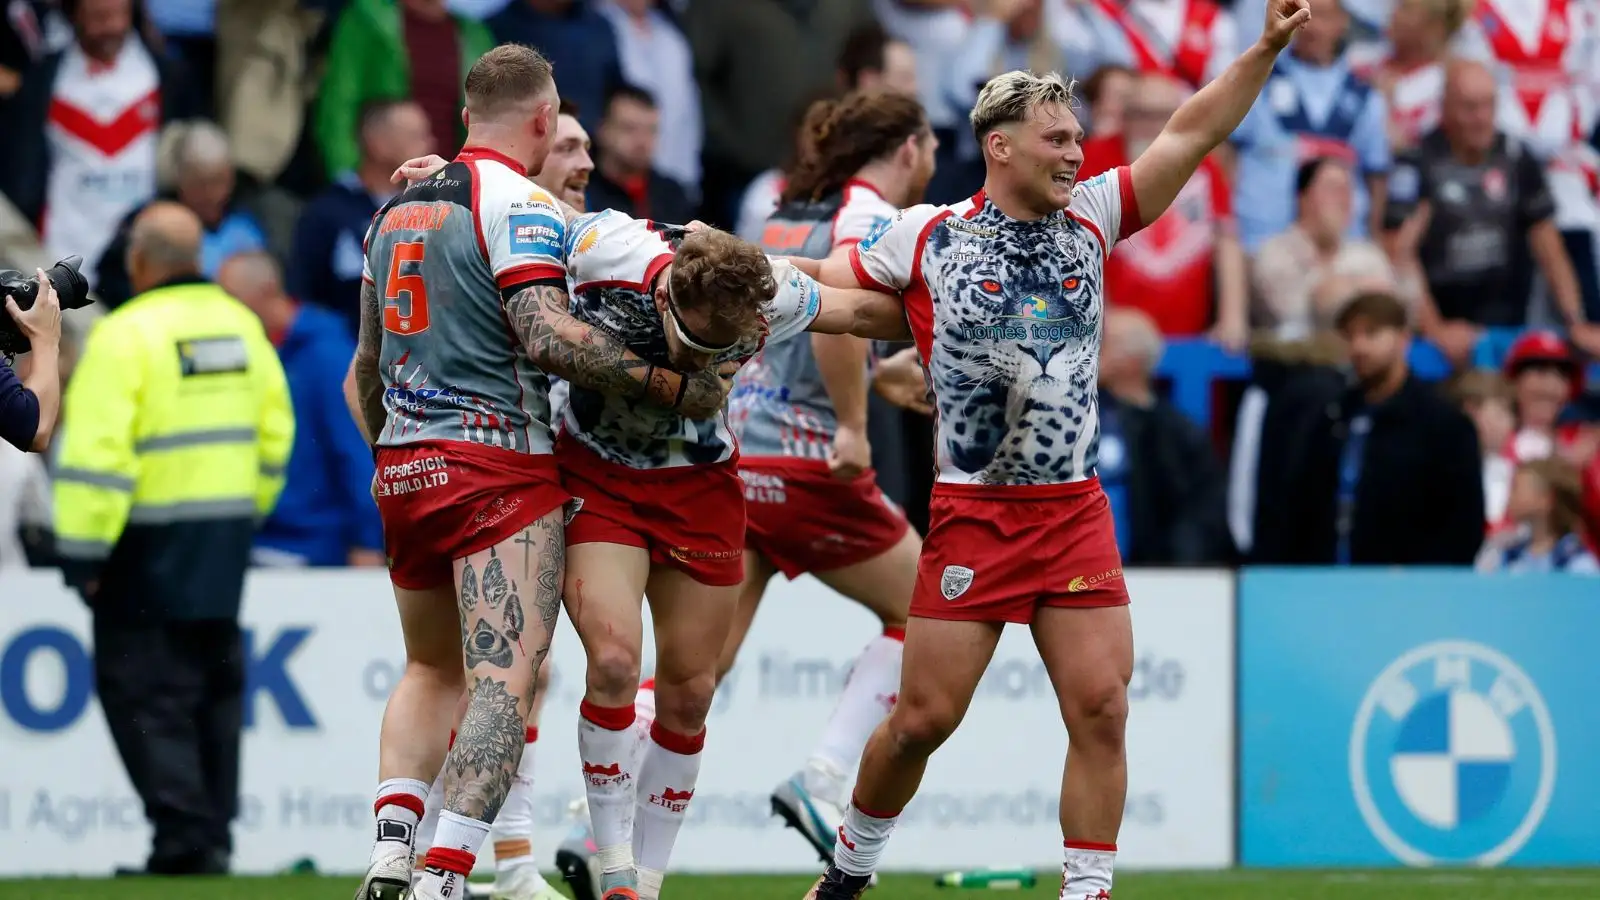 Lachlan Lam lost for words after helping Leigh Leopards reach first Challenge Cup final since 1971